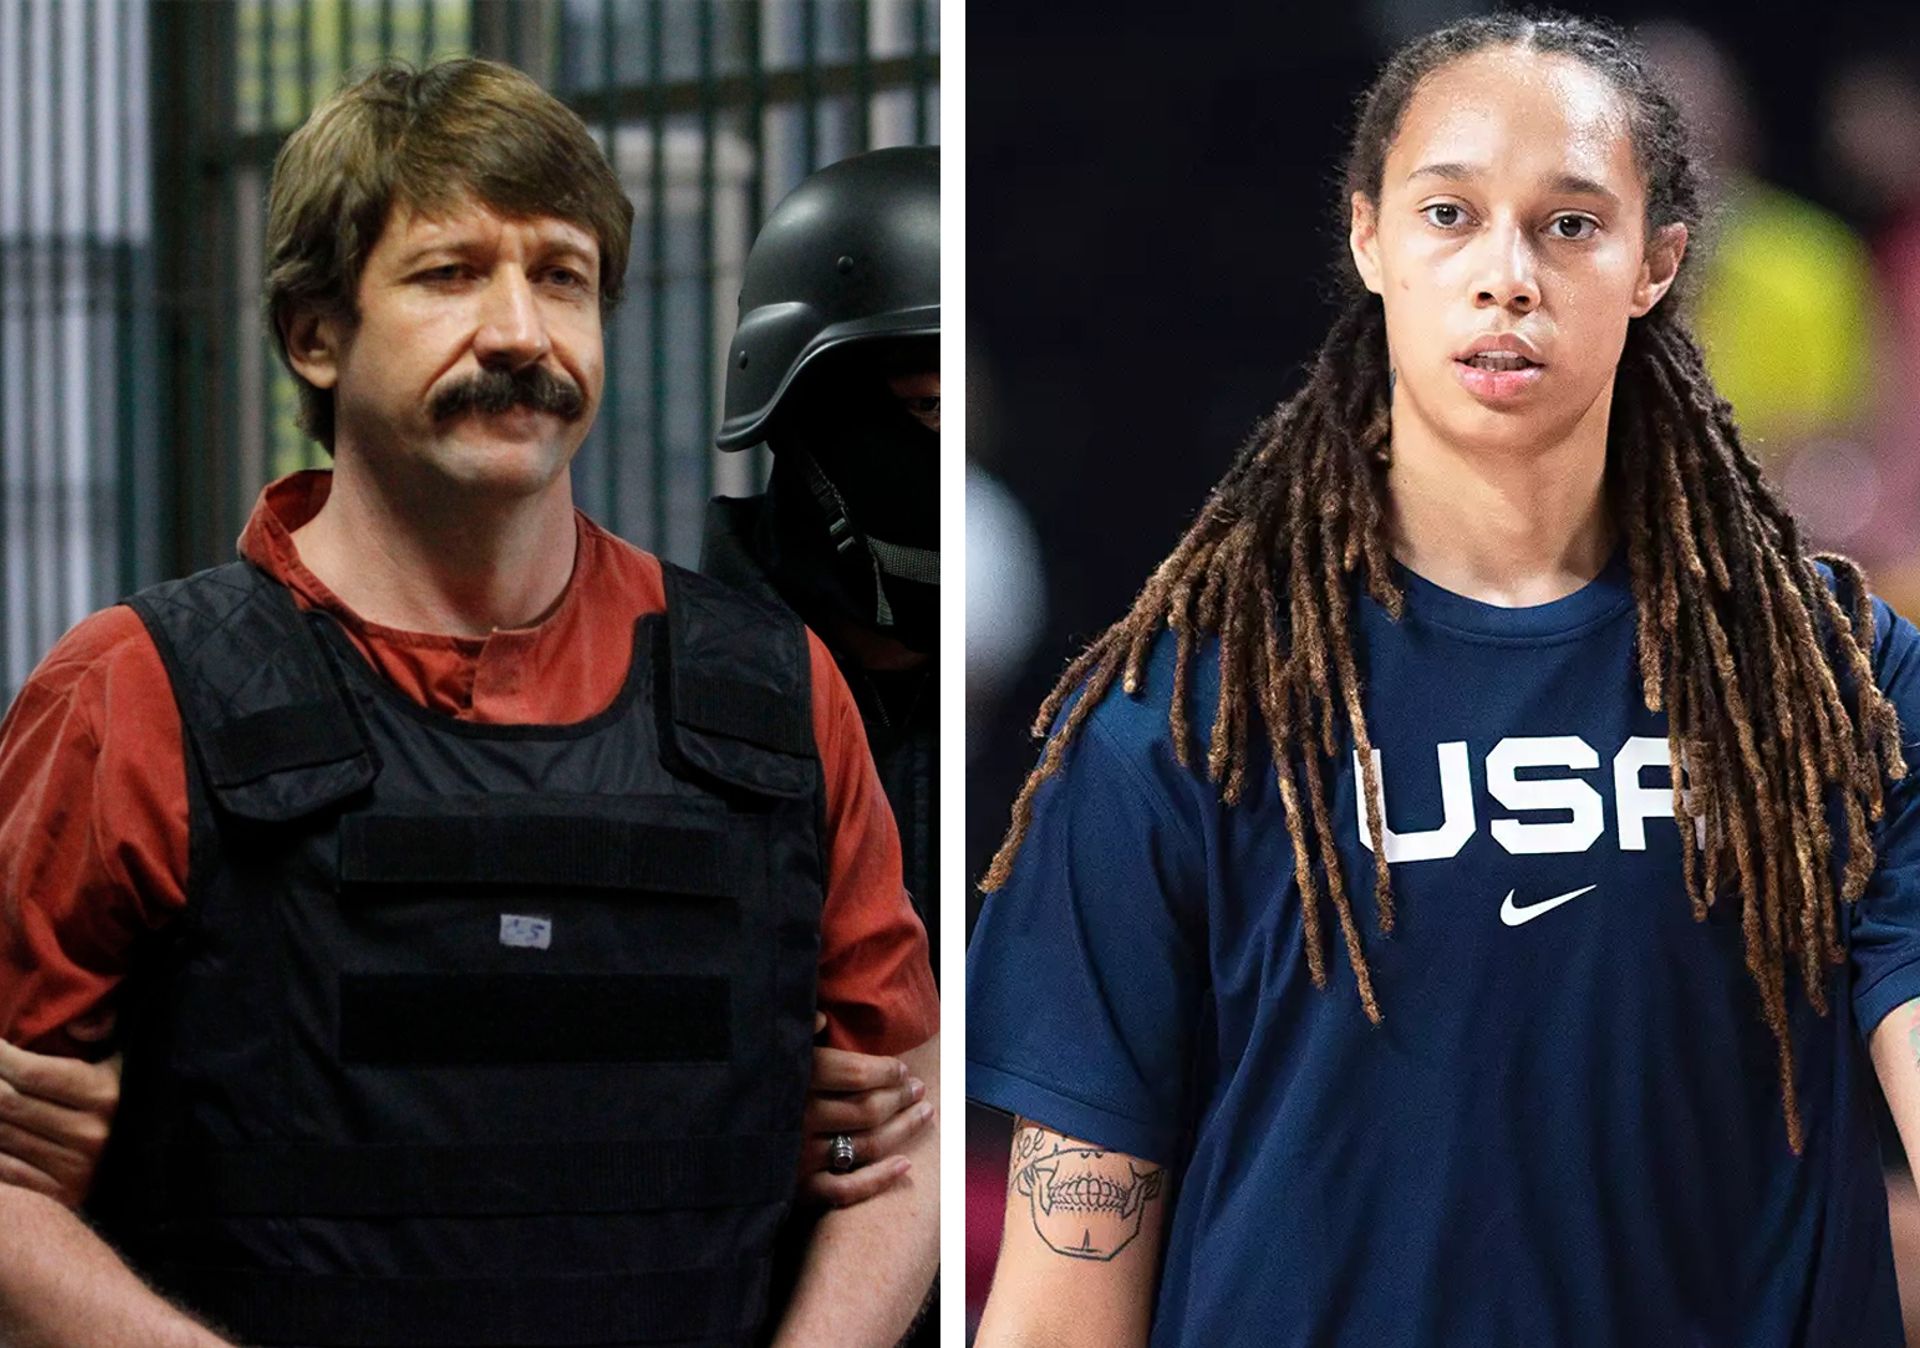 Viktor Bout was exchanged for US basketball player Brittney Griner in a high-level prisoner swap. © Reuters/Alamy